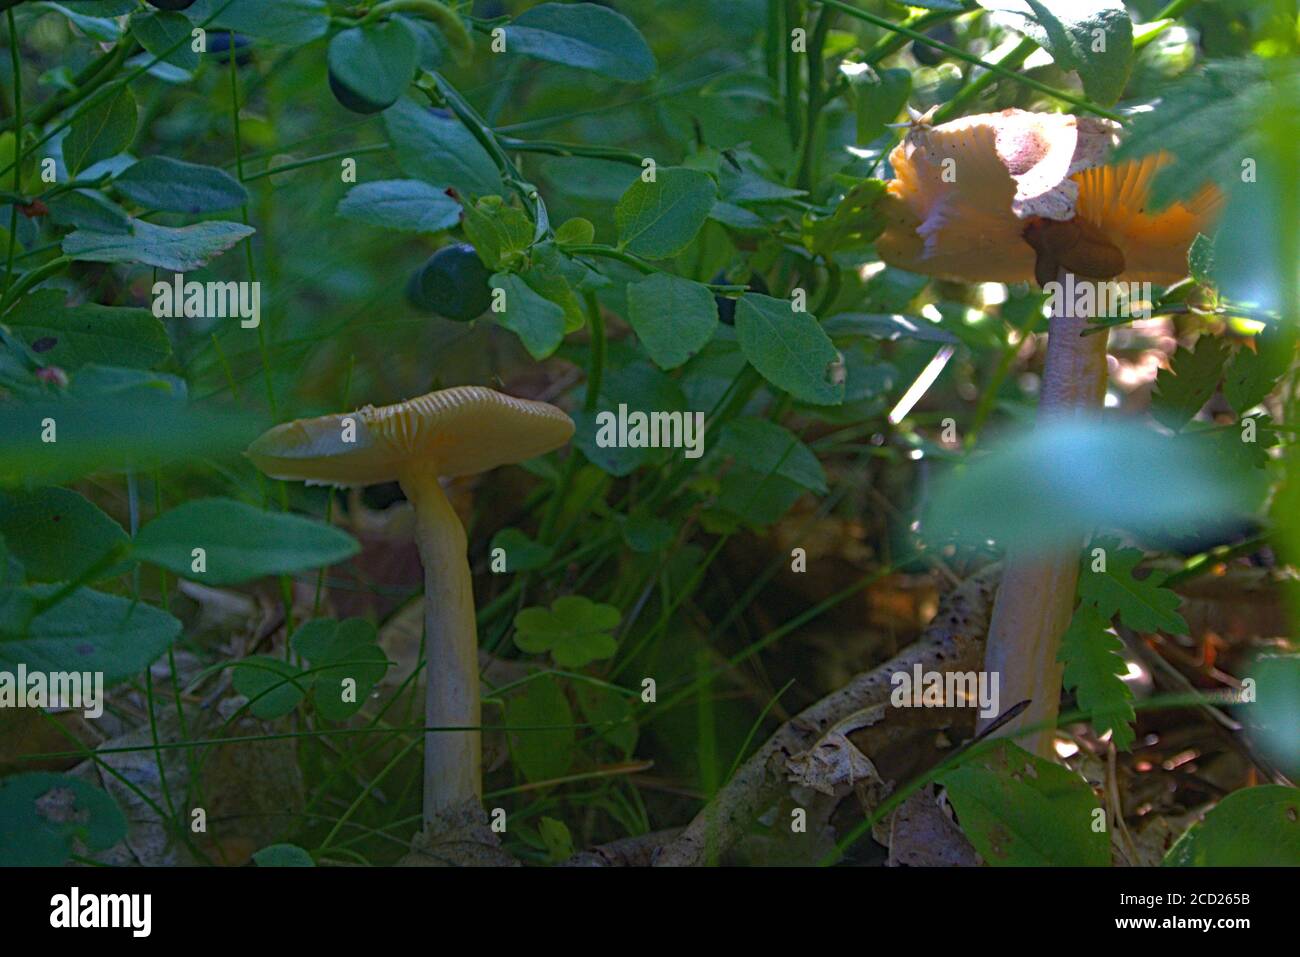 Two yellow capped poisonous mushrooms on the forest floor Stock Photo